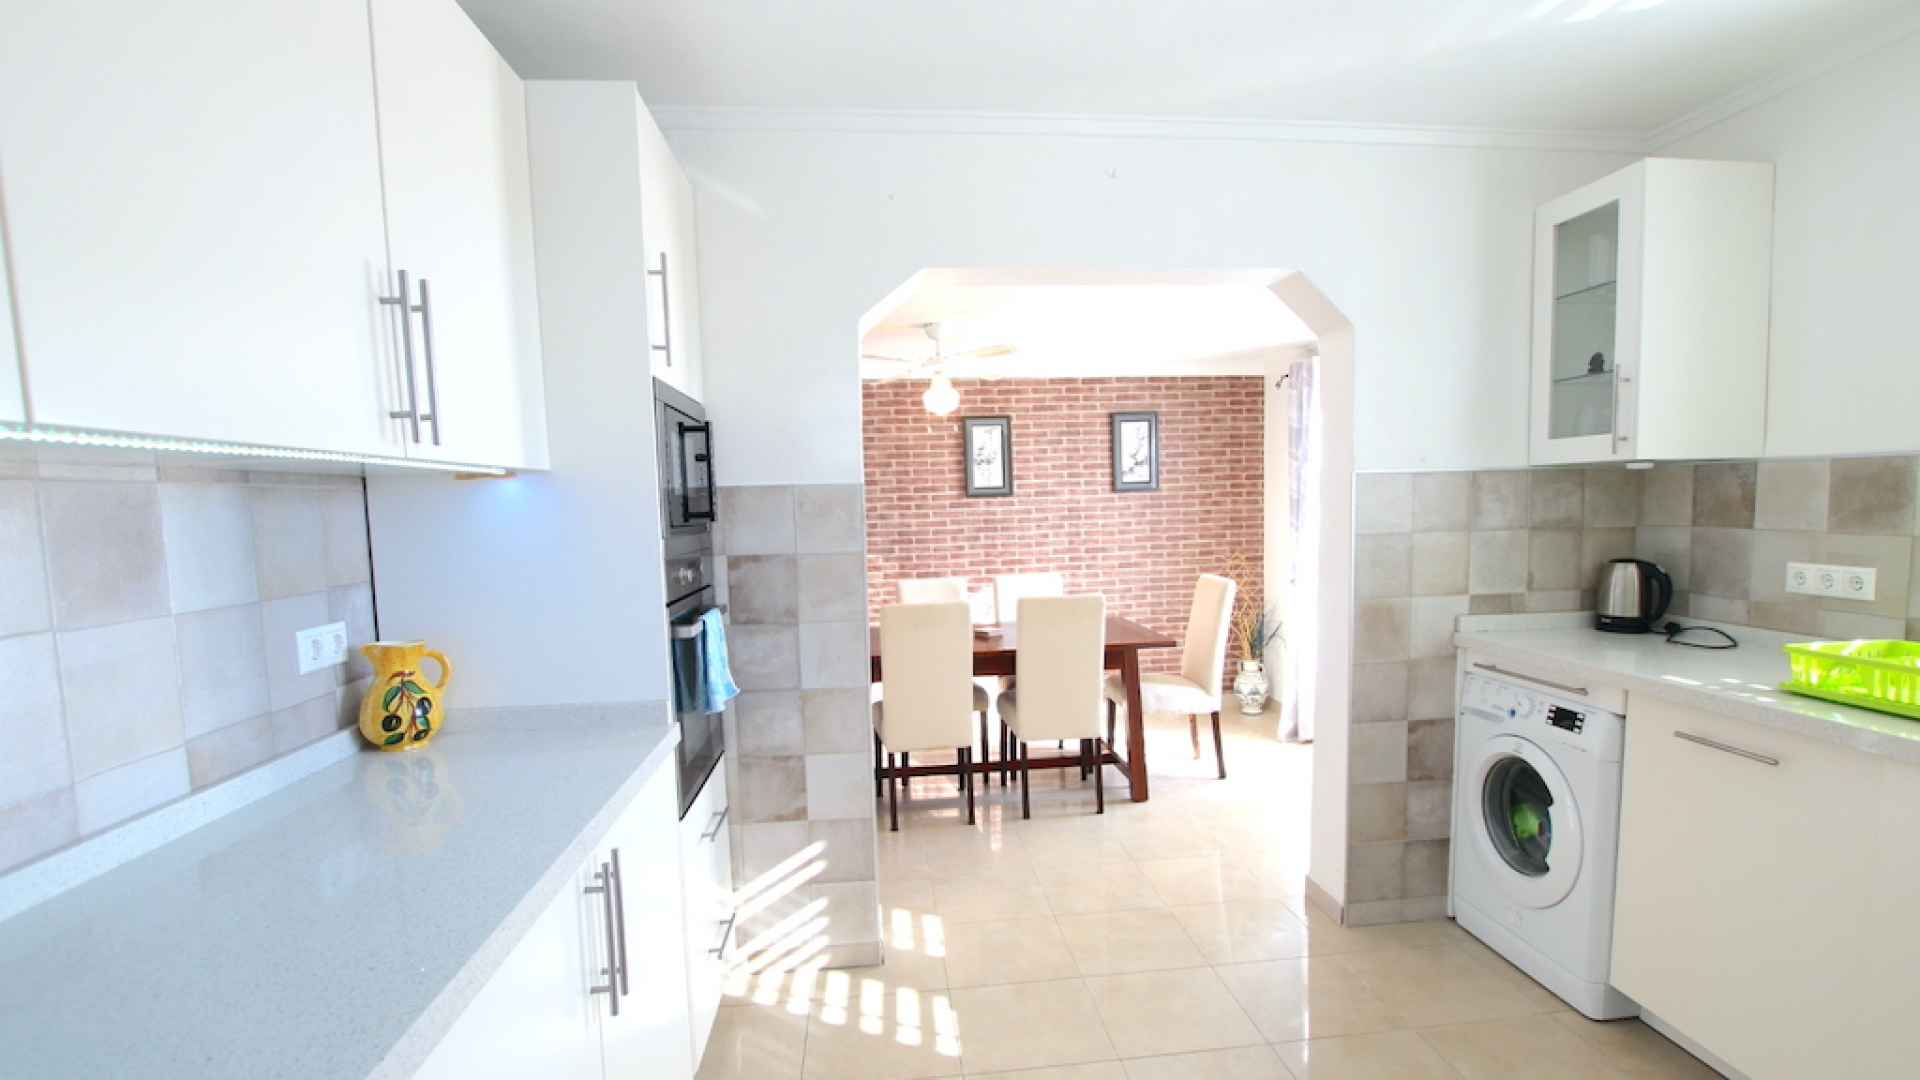 48358_expansive_4_bed_detached_villa_with_private_pool_and_garage_220224130511_img_7488